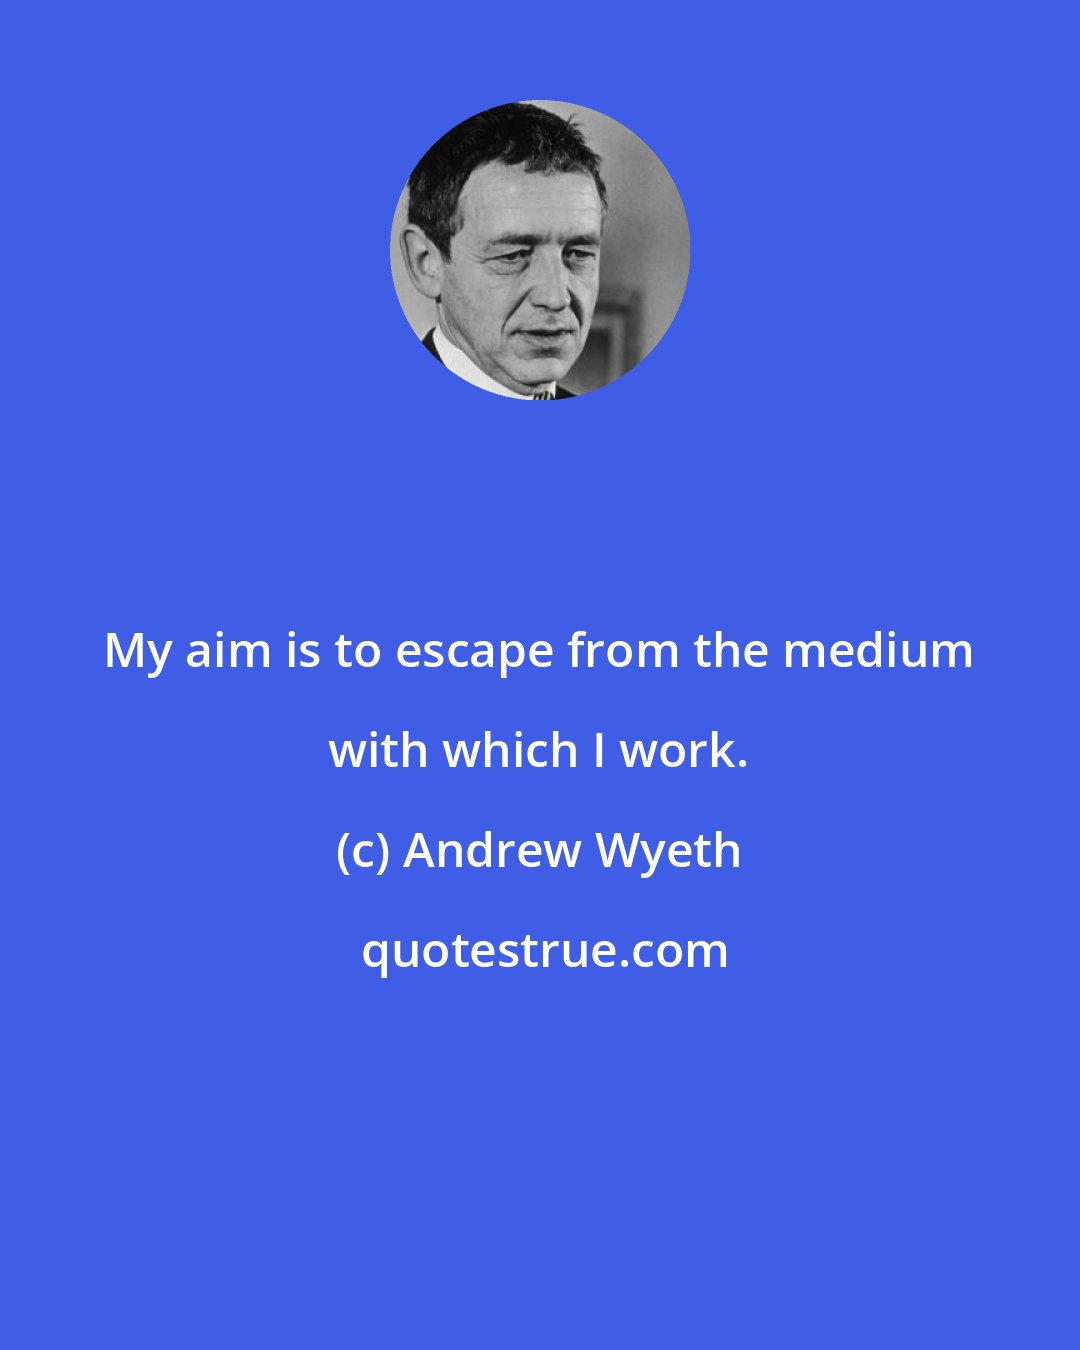 Andrew Wyeth: My aim is to escape from the medium with which I work.